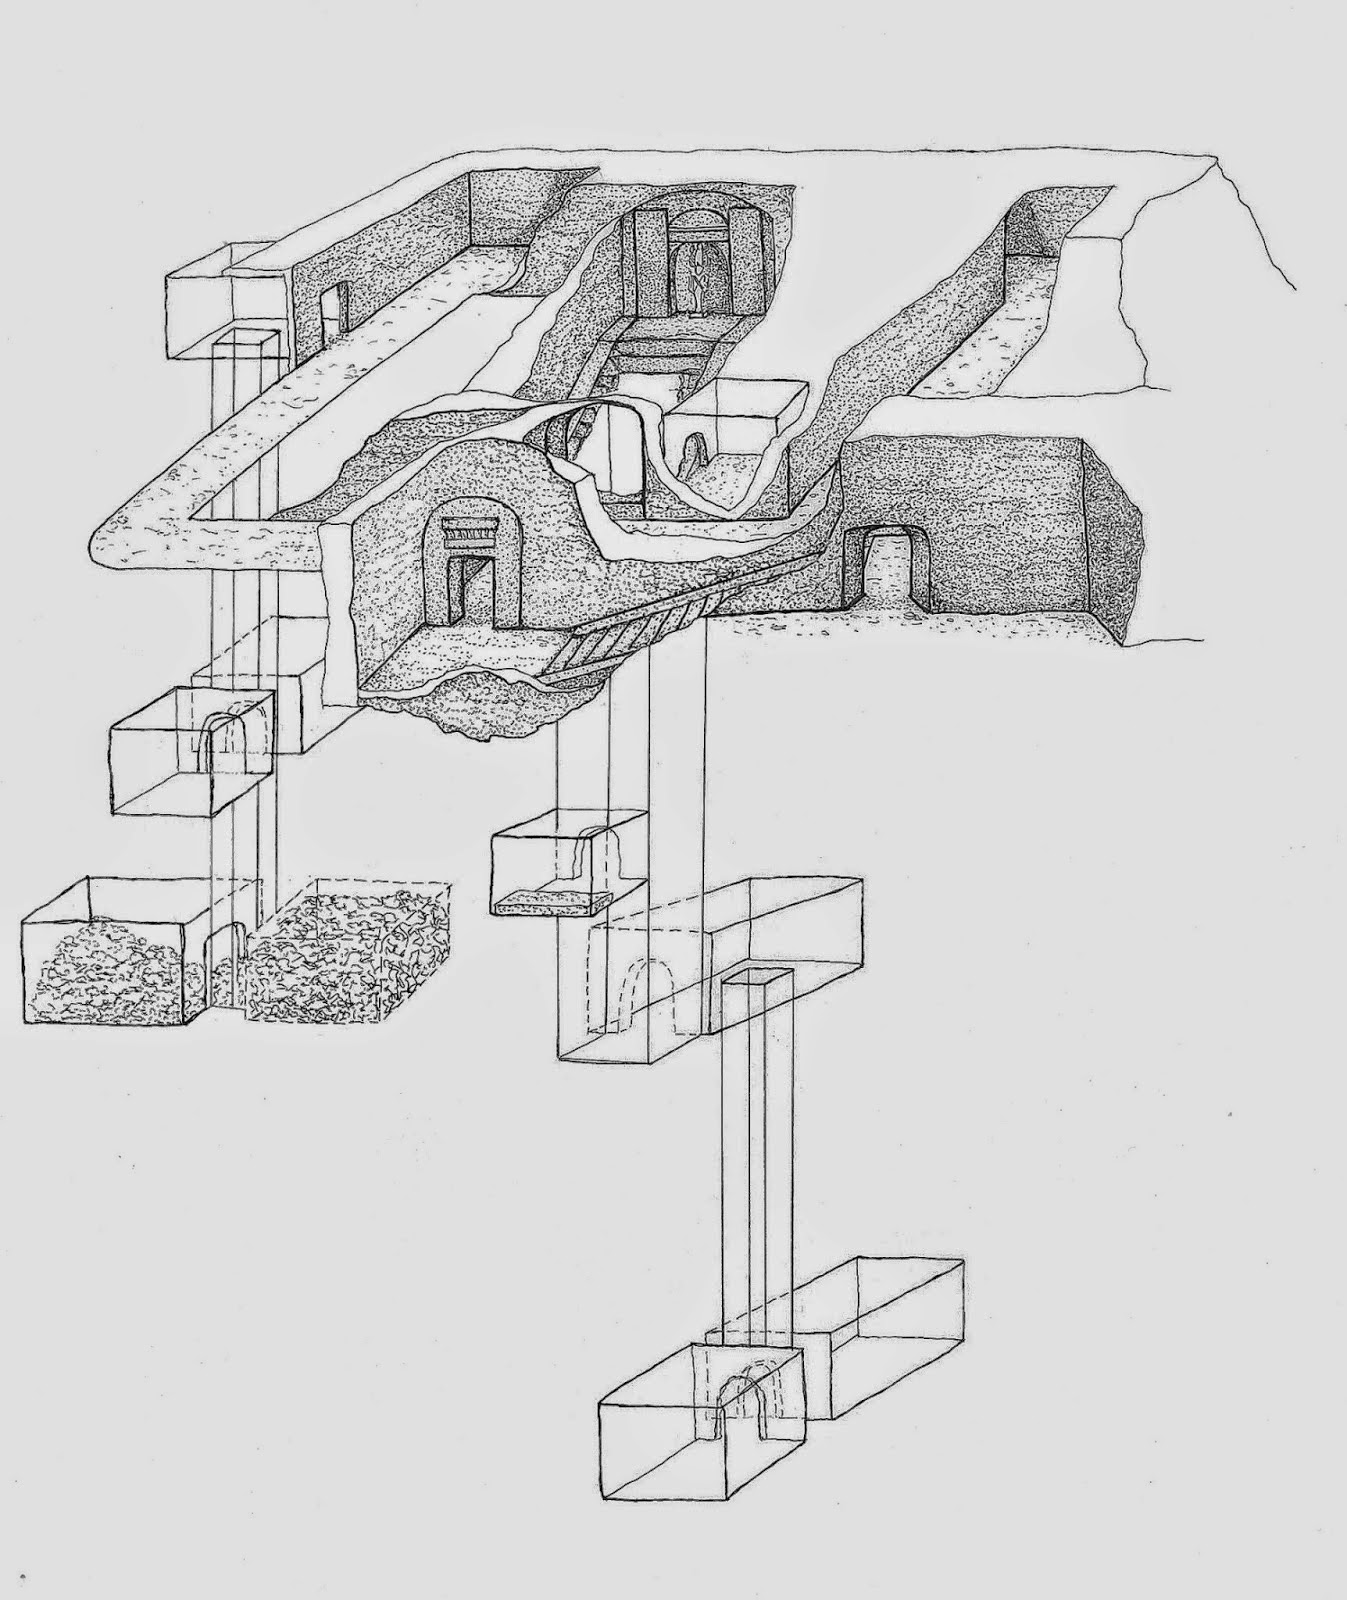 Sketch showing the outline of the tomb of Osiris. Drawing of the tomb's architecture made by Raffaella Carrera, MinProject (Archaeological Mission Canaria-Toscana).